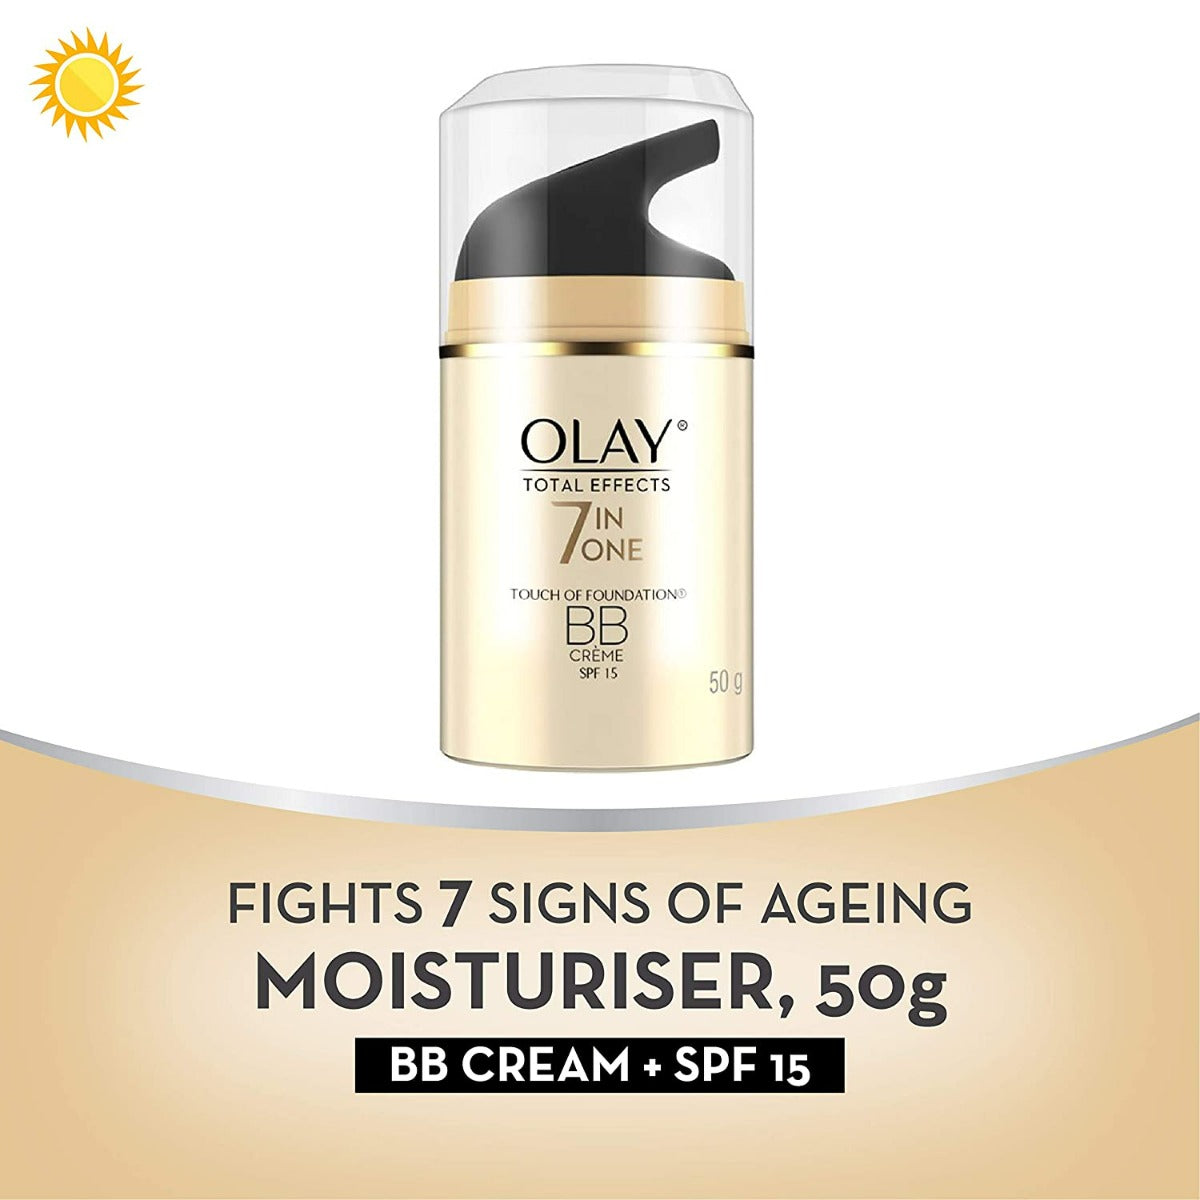 Olay Total Effects 7 In One Touch of Foundation BB Cream SPF 15 (50gm)